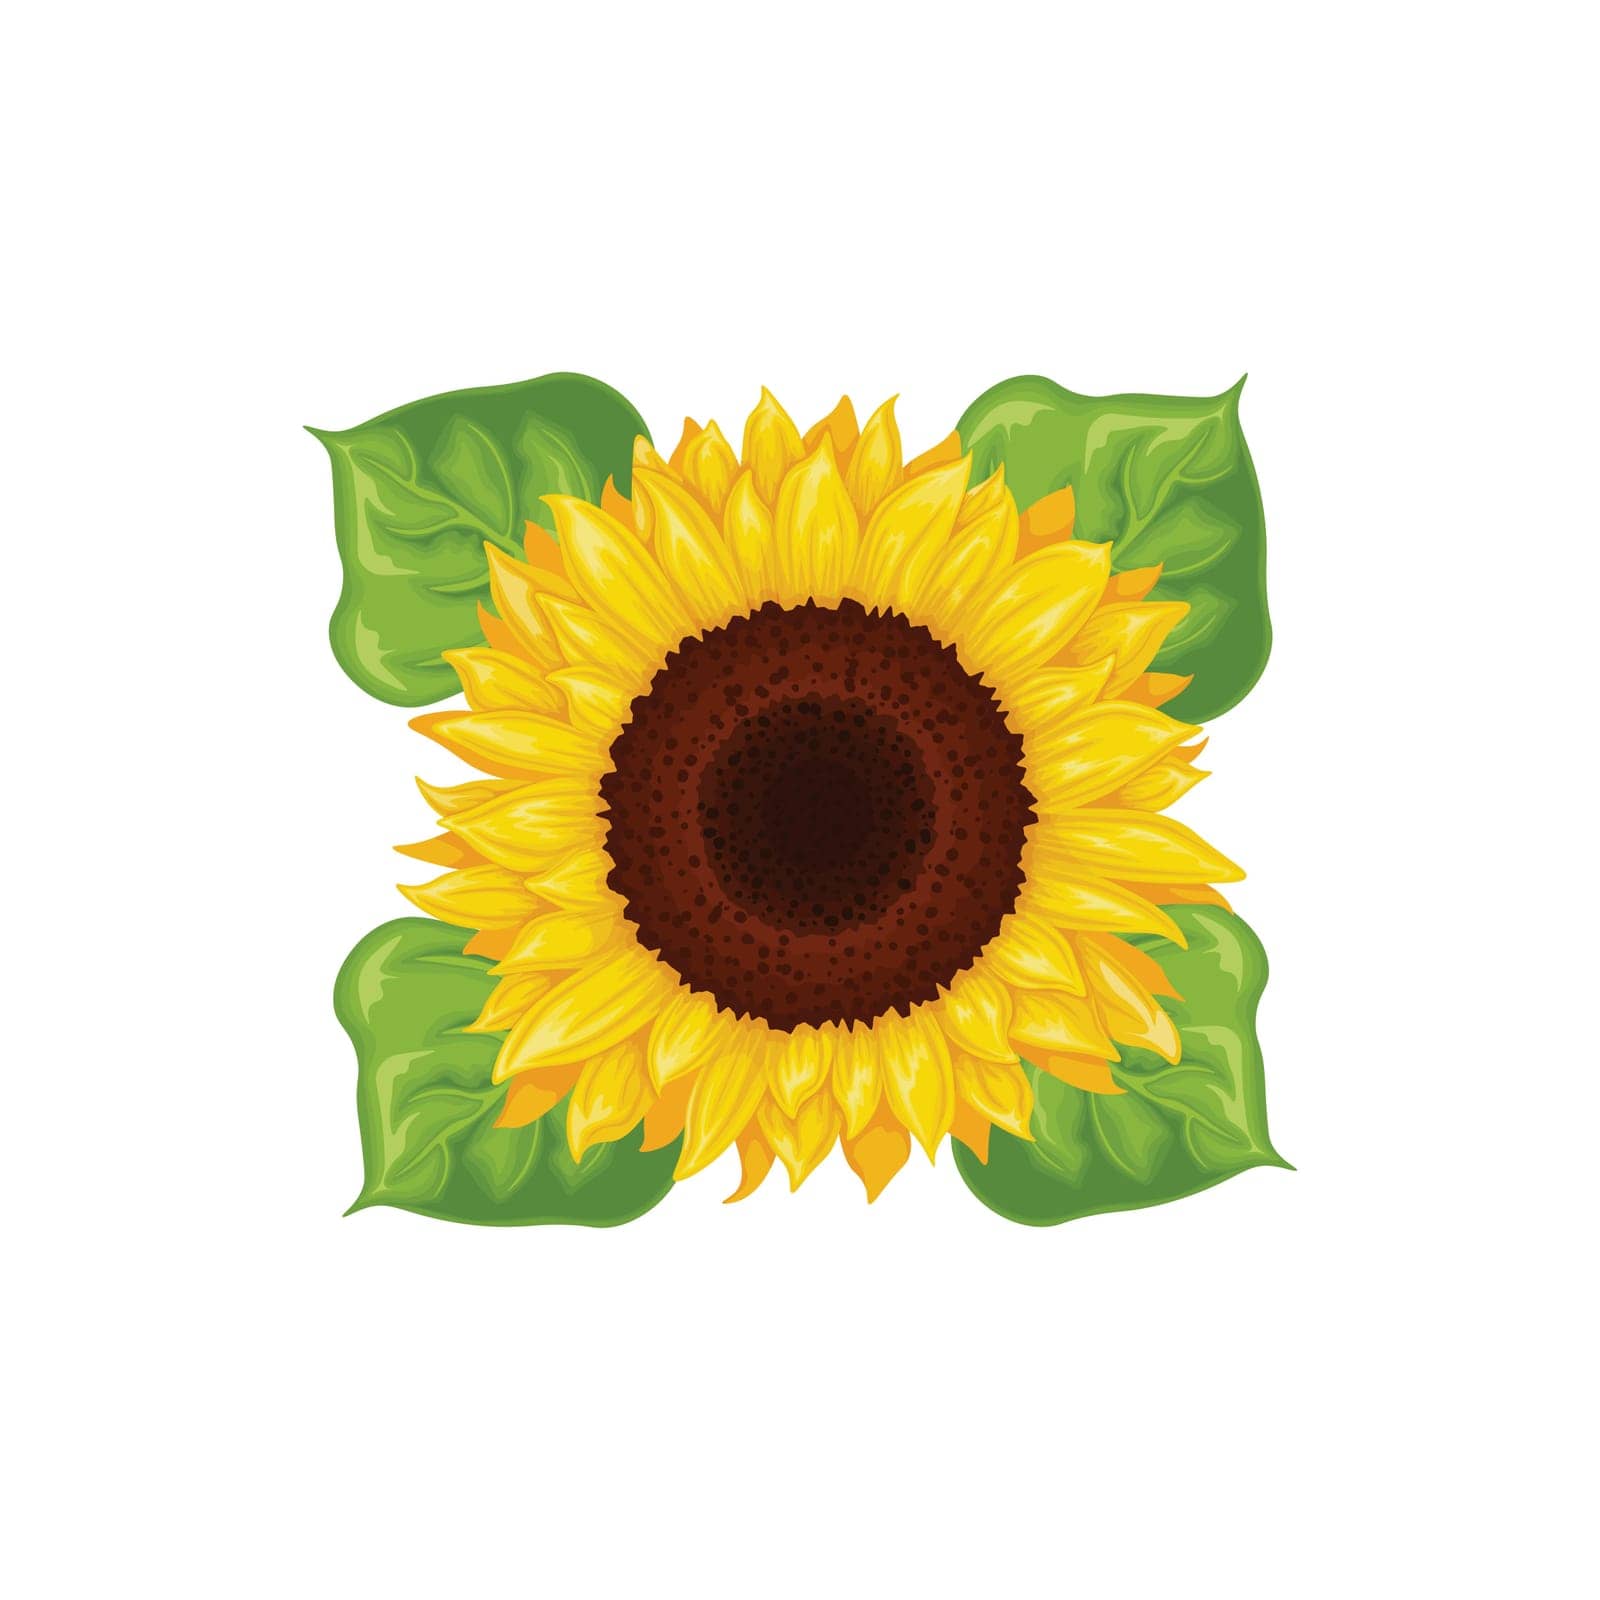 Sunflower. The image of a sunflower in cartoon style. Yellow sunflower with green leaves. Vector illustration isolated on a white background by NastyaN